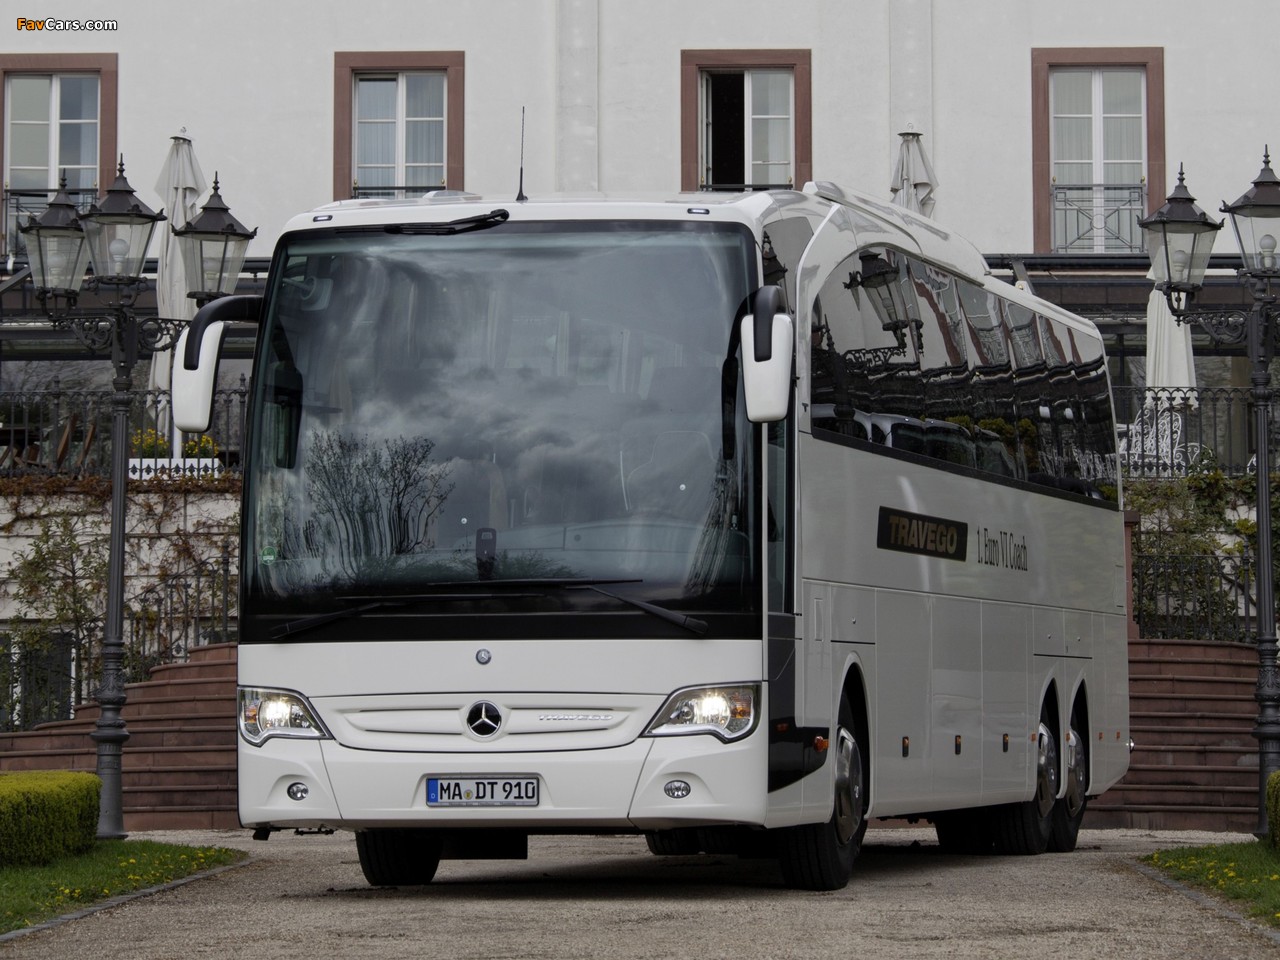 Mercedes-Benz Travego Edition 1 (O580) 2011 pictures (1280 x 960)